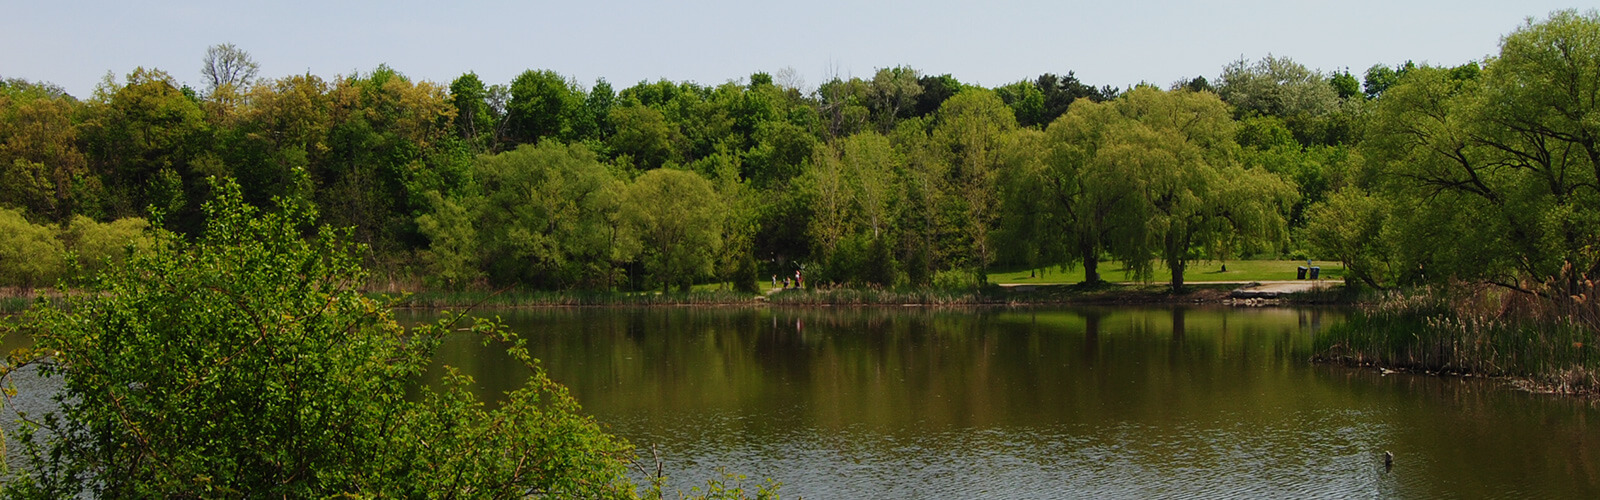 Topham Pond during a sunny day